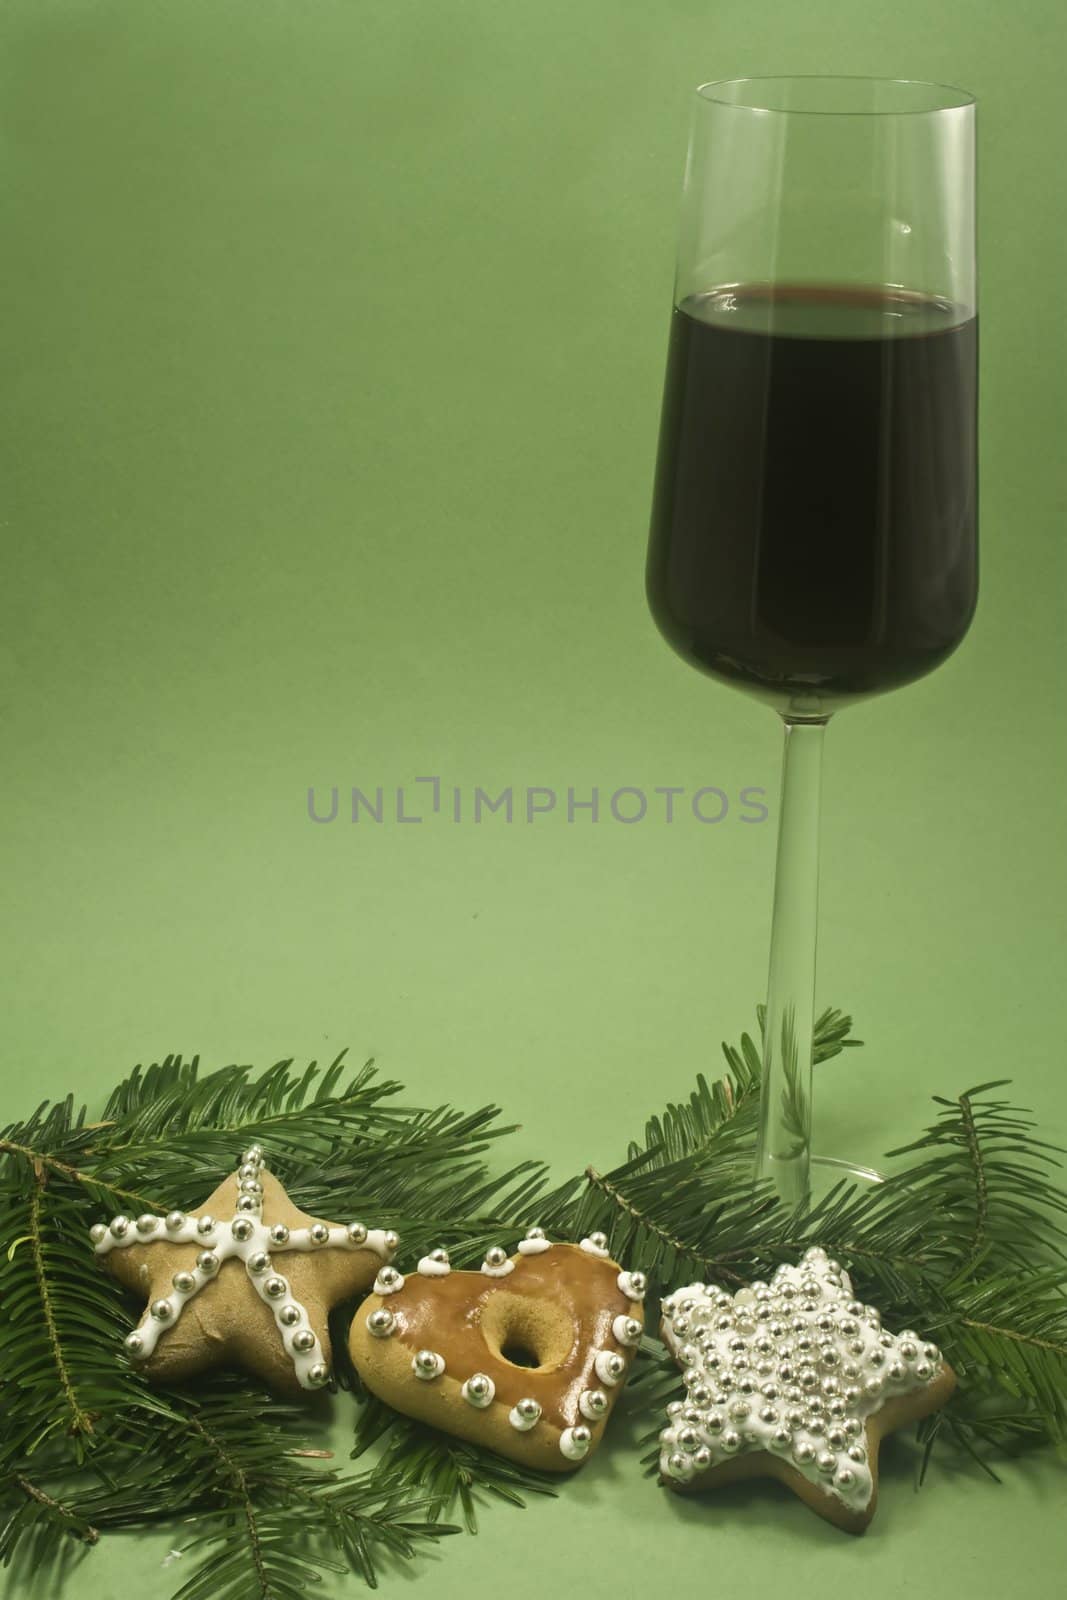 Wine and Christmas cookie by timscottrom